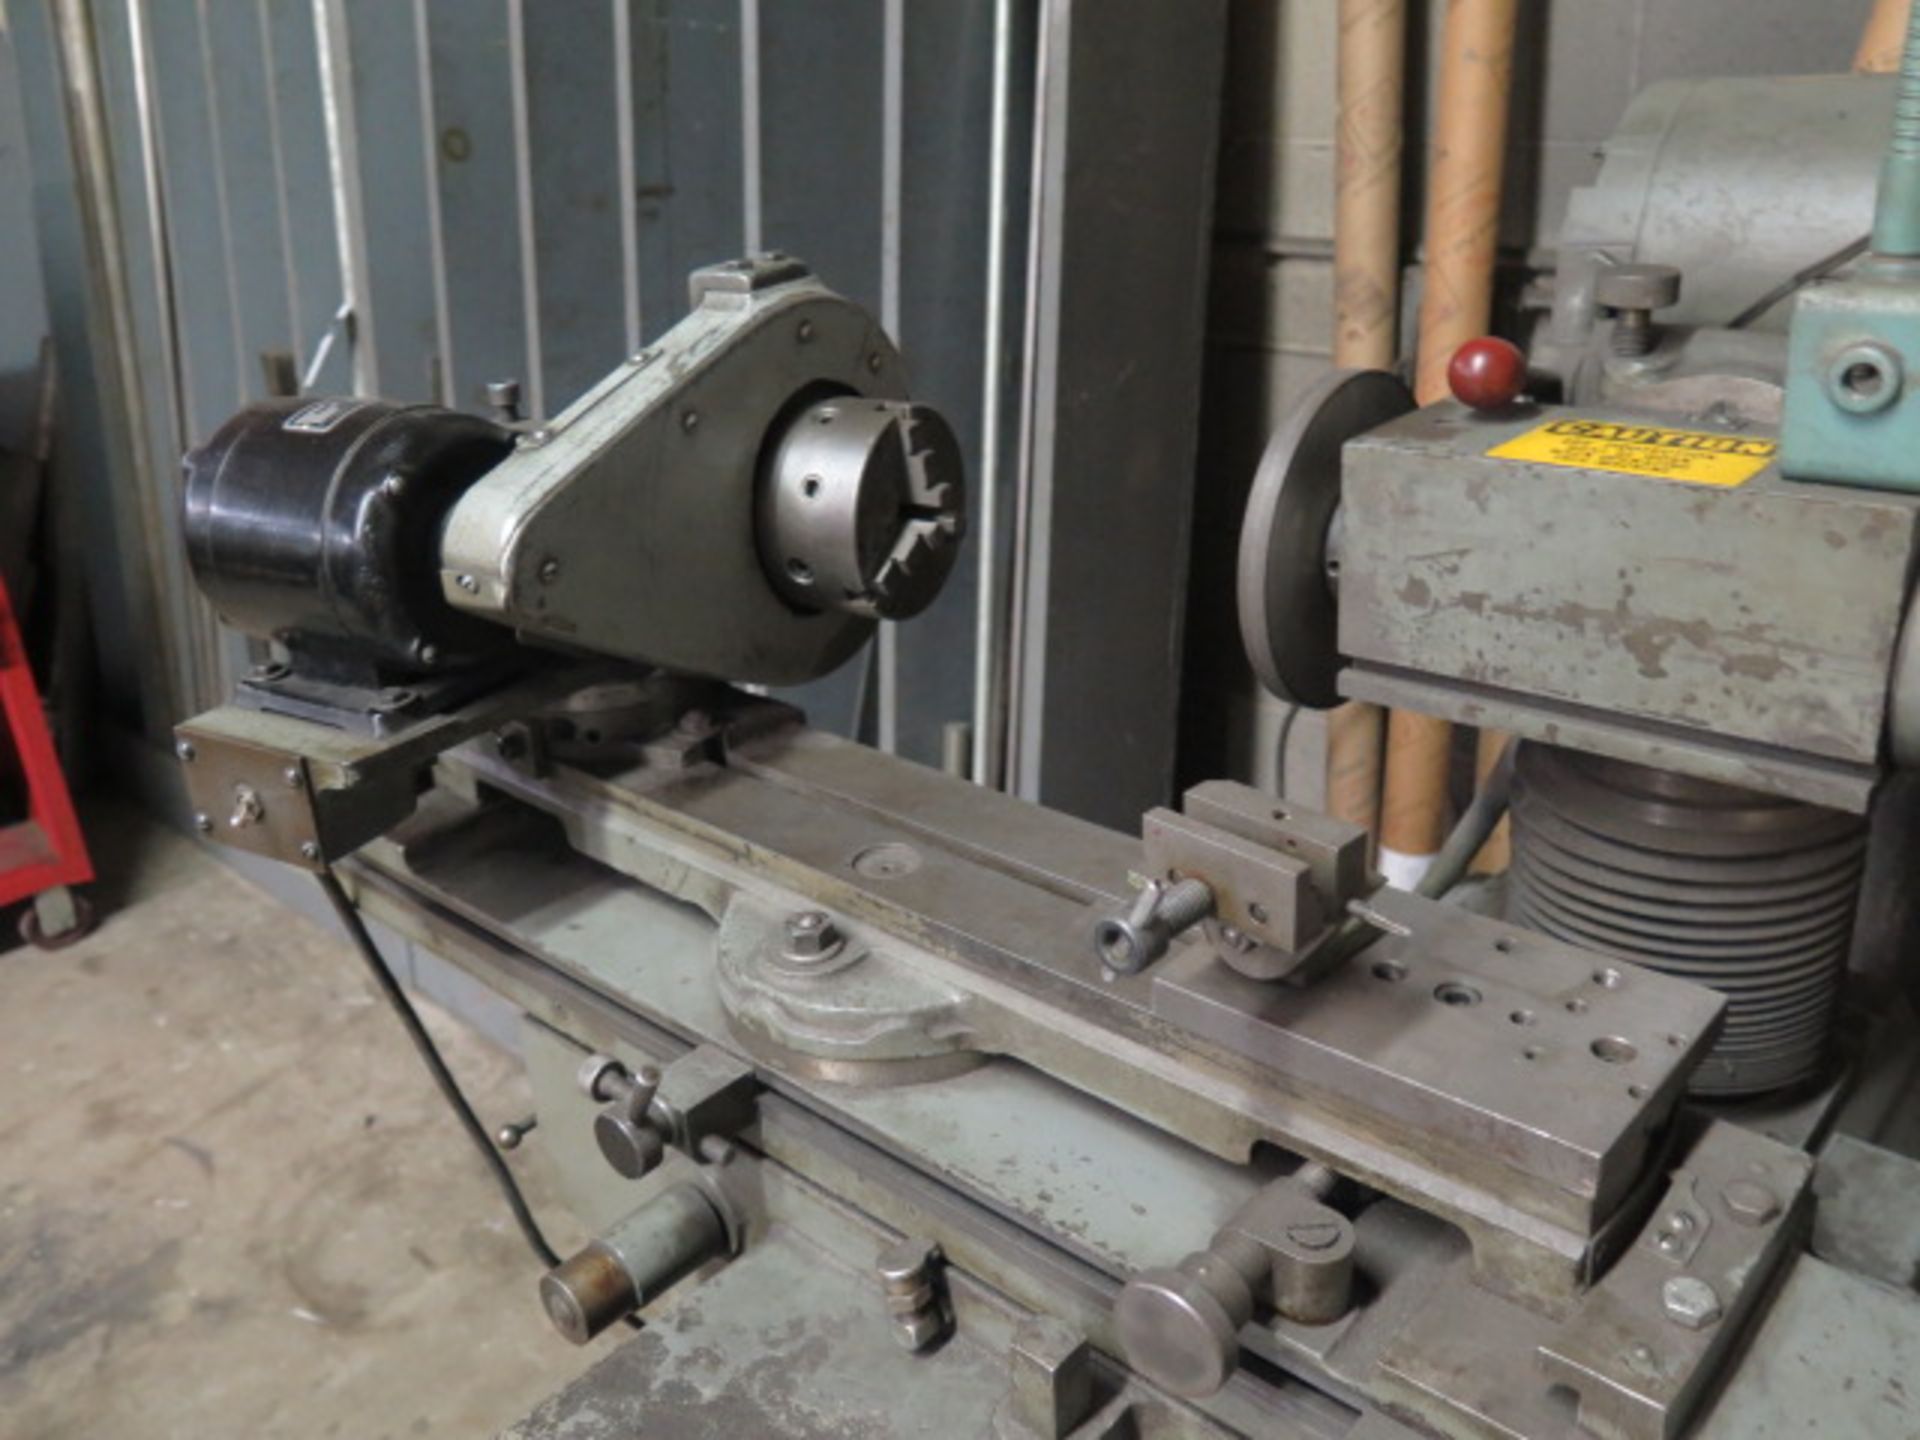 Clausing mdl. 4400 Tool & Cutter Grinder s/n 6A2695 w/ Compound Grinding Head, Motorized Work Head - Image 4 of 7